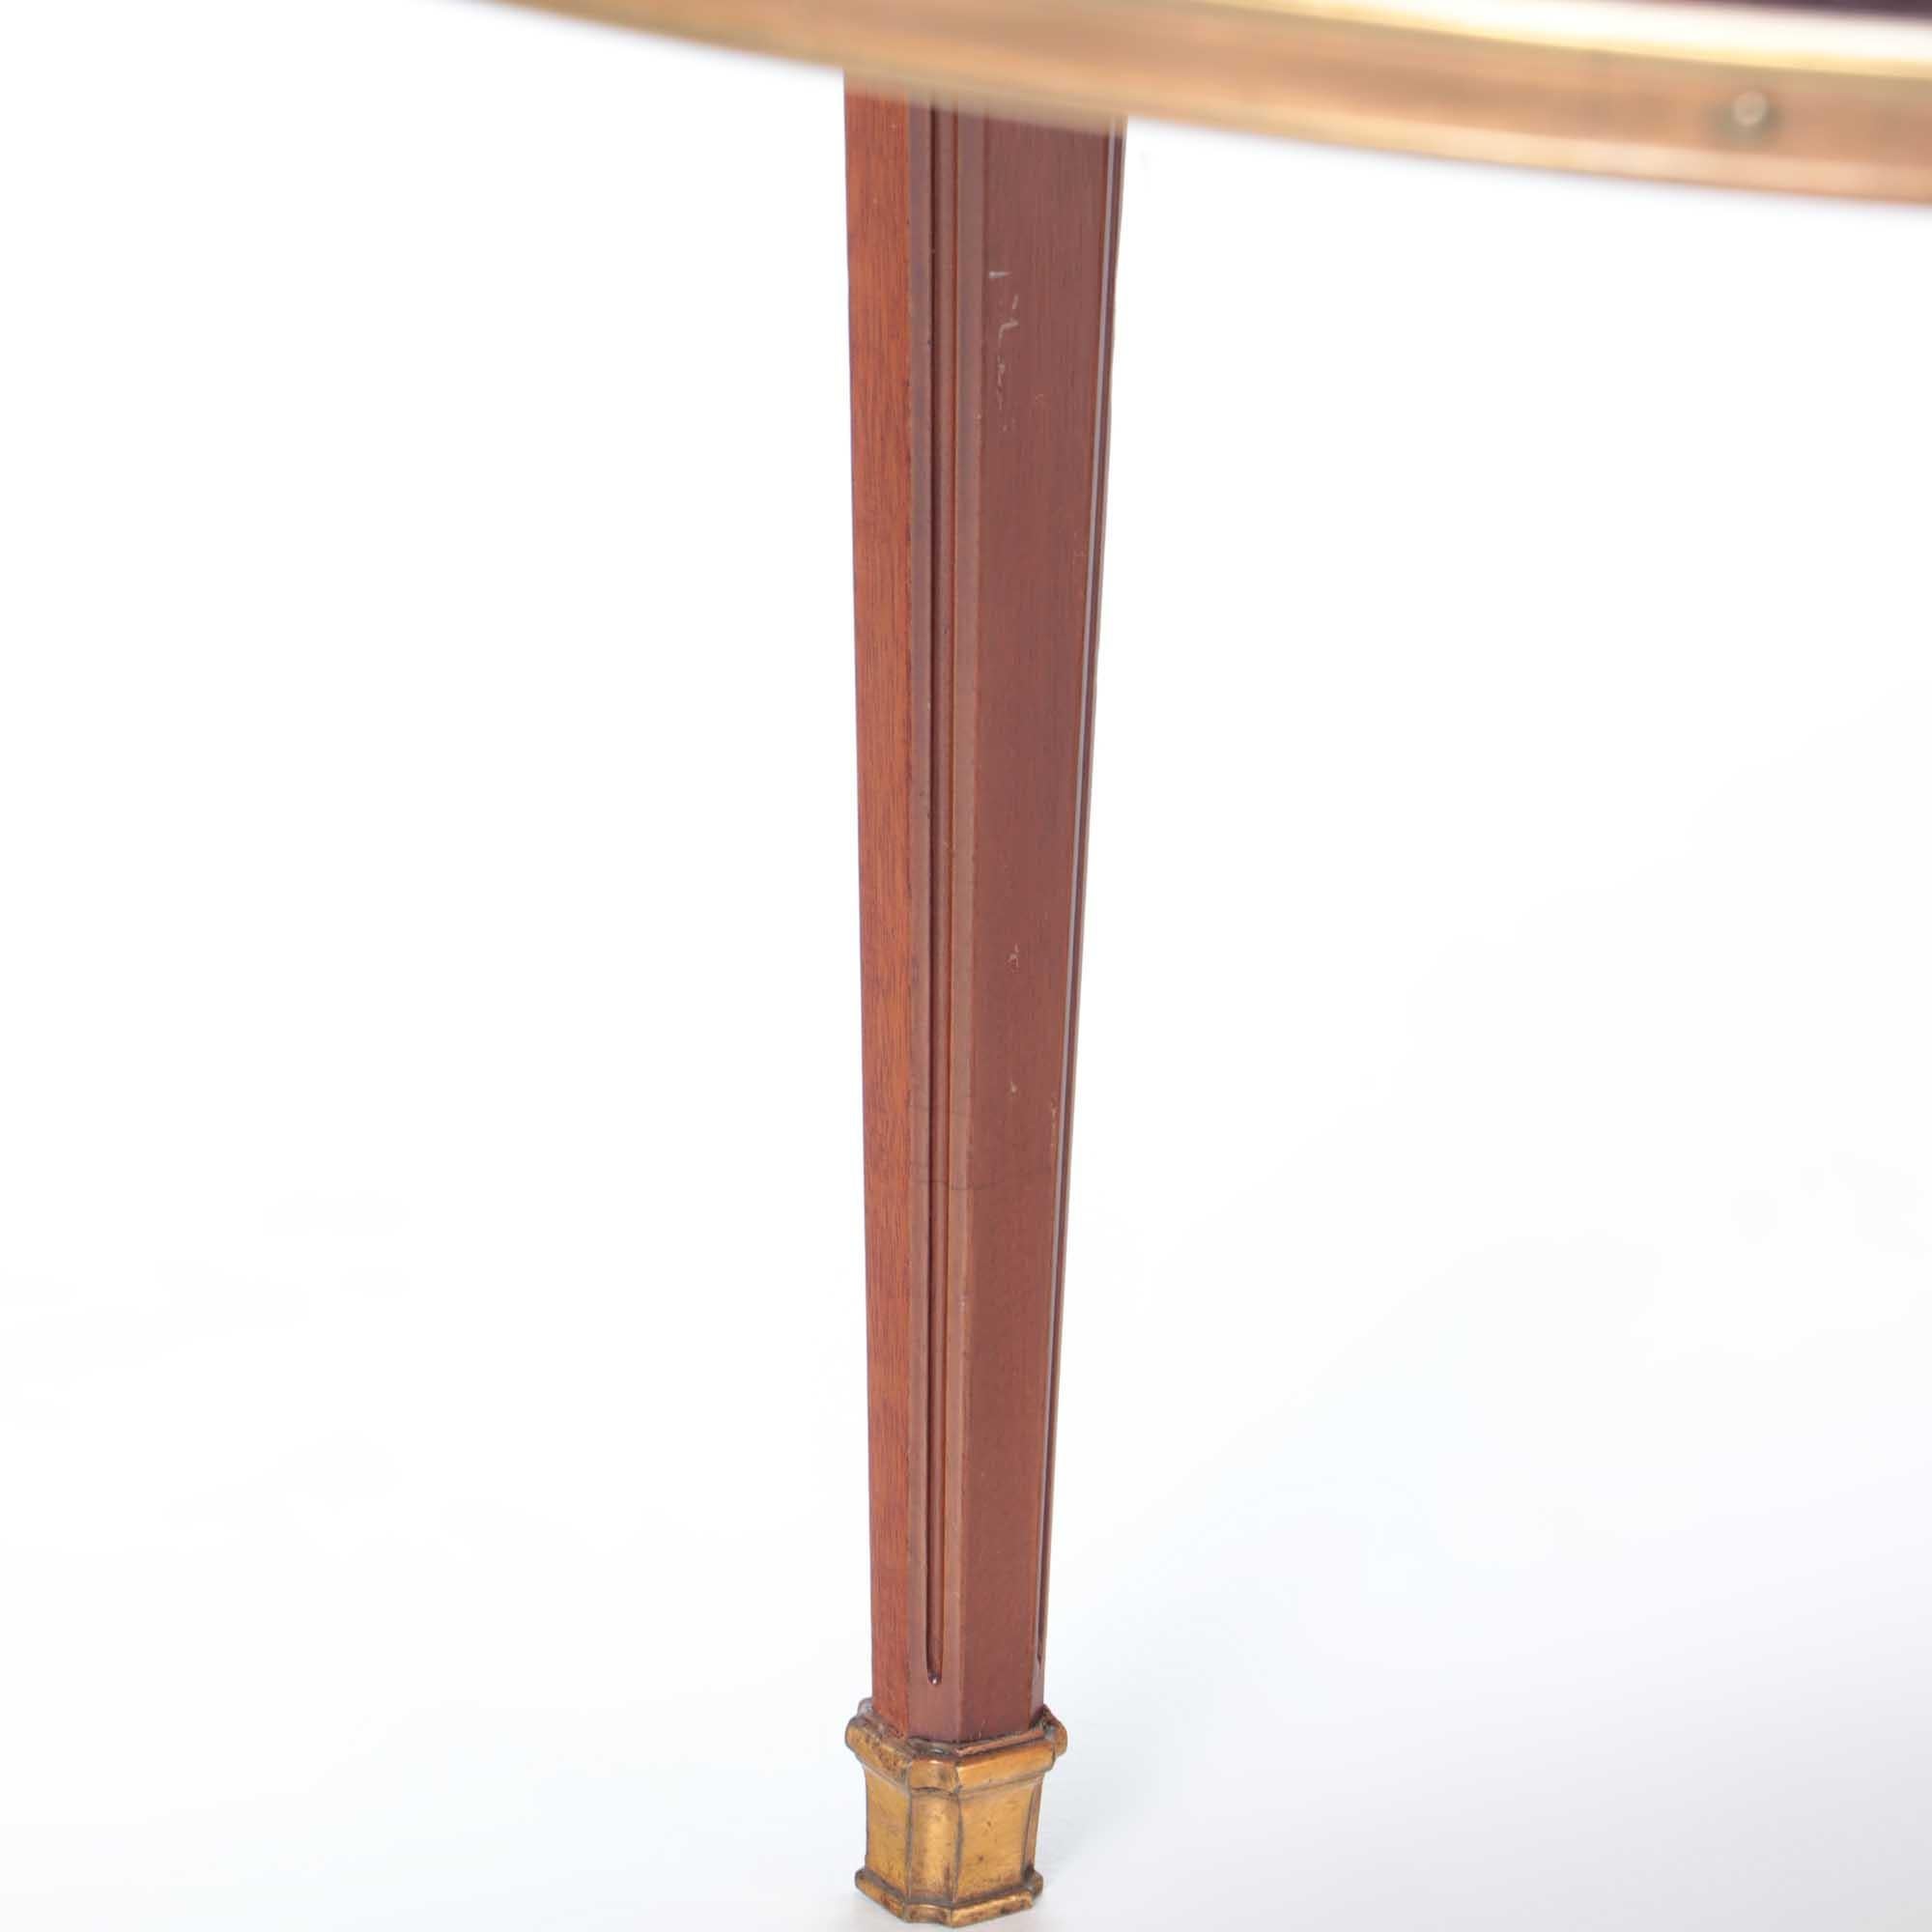 20th Century Large Bronze Mounted Flame Mahogany Dining Table with 2 Leaves, circa 1945